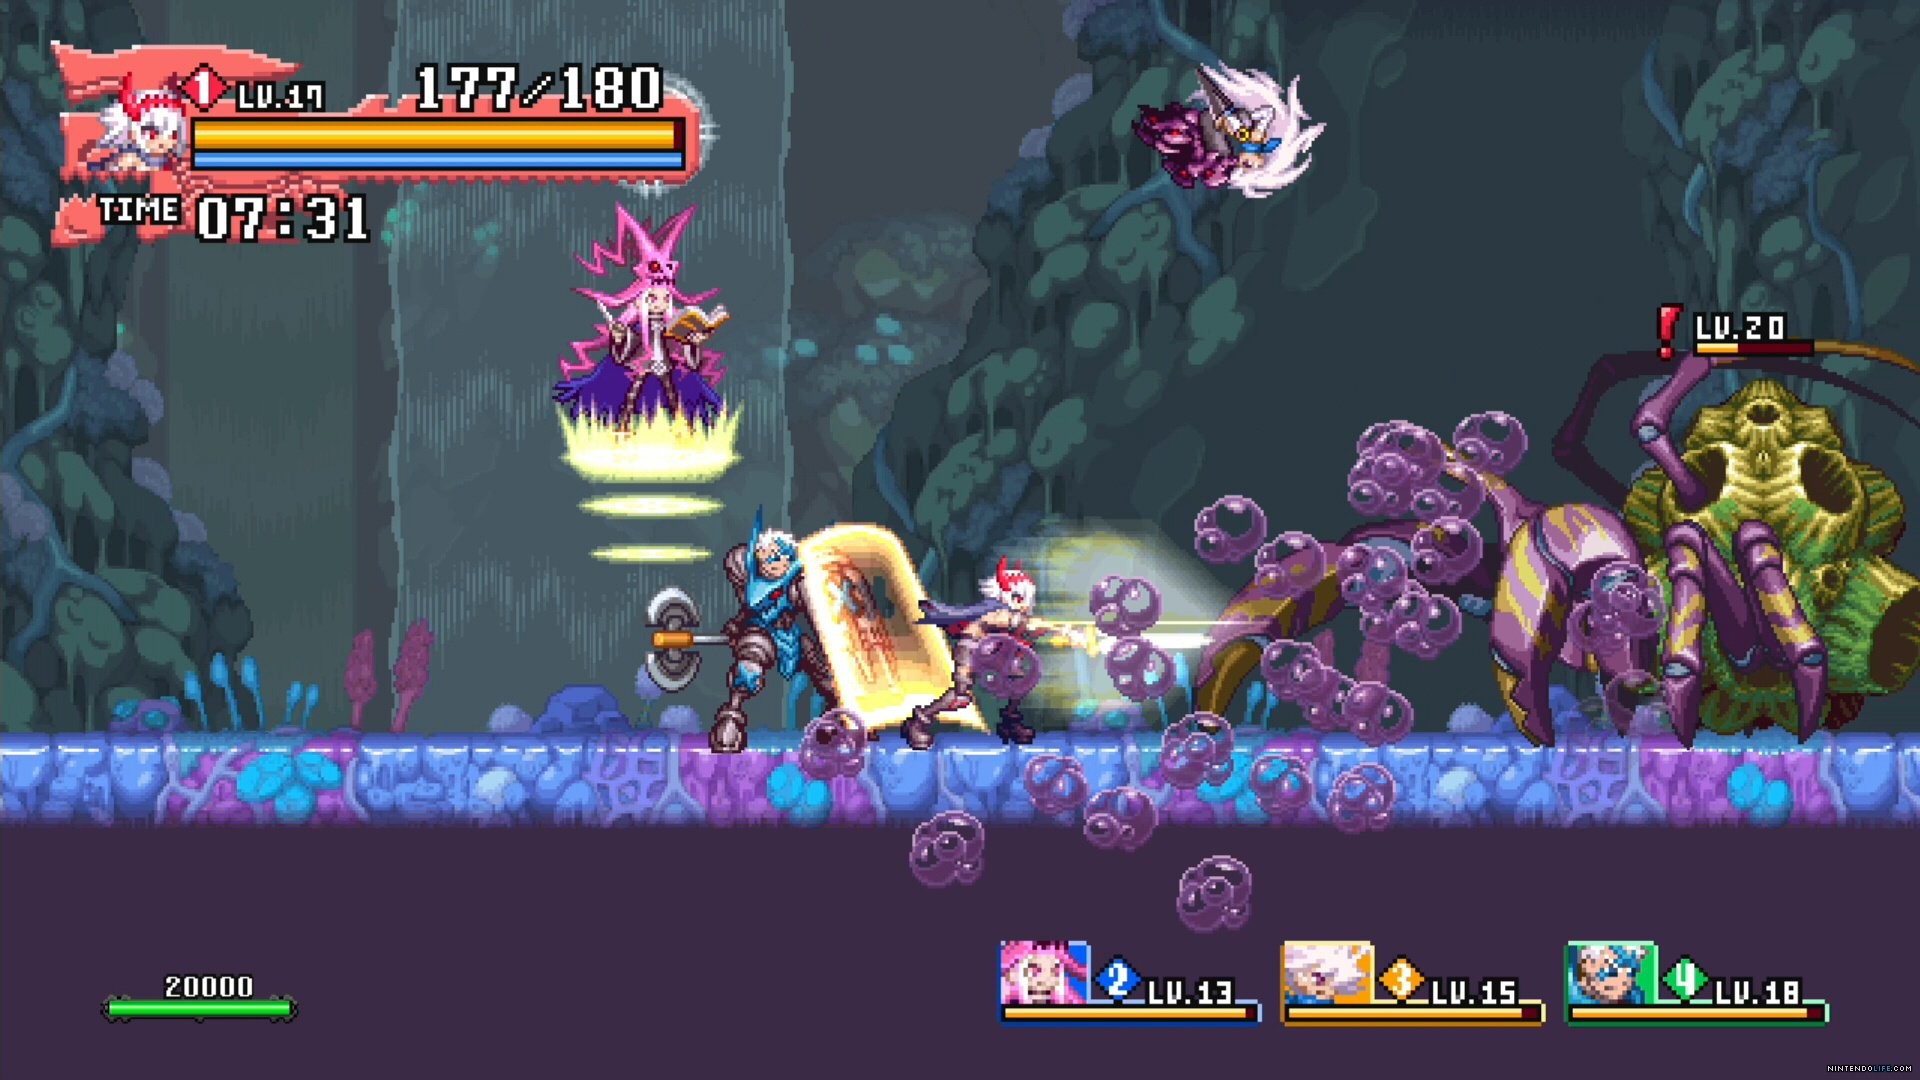 1920x1080 Dragon: Marked for Death Review - Screenshot 4 of 5